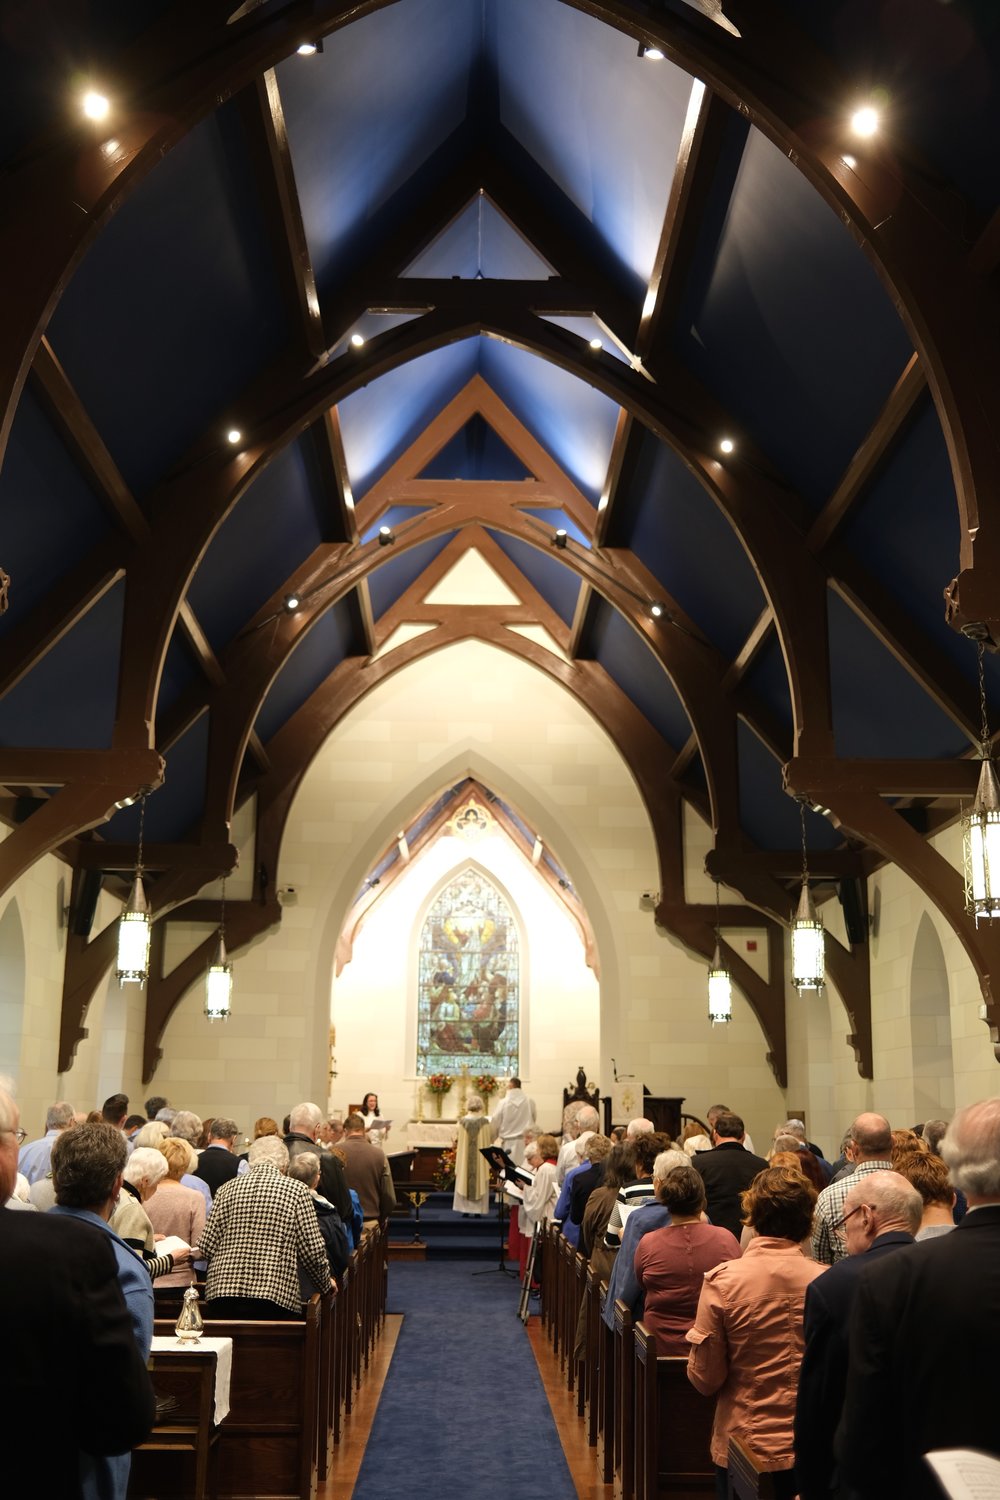 Restoring the 175-year-old church’s interior was the final phase of the five-year project.